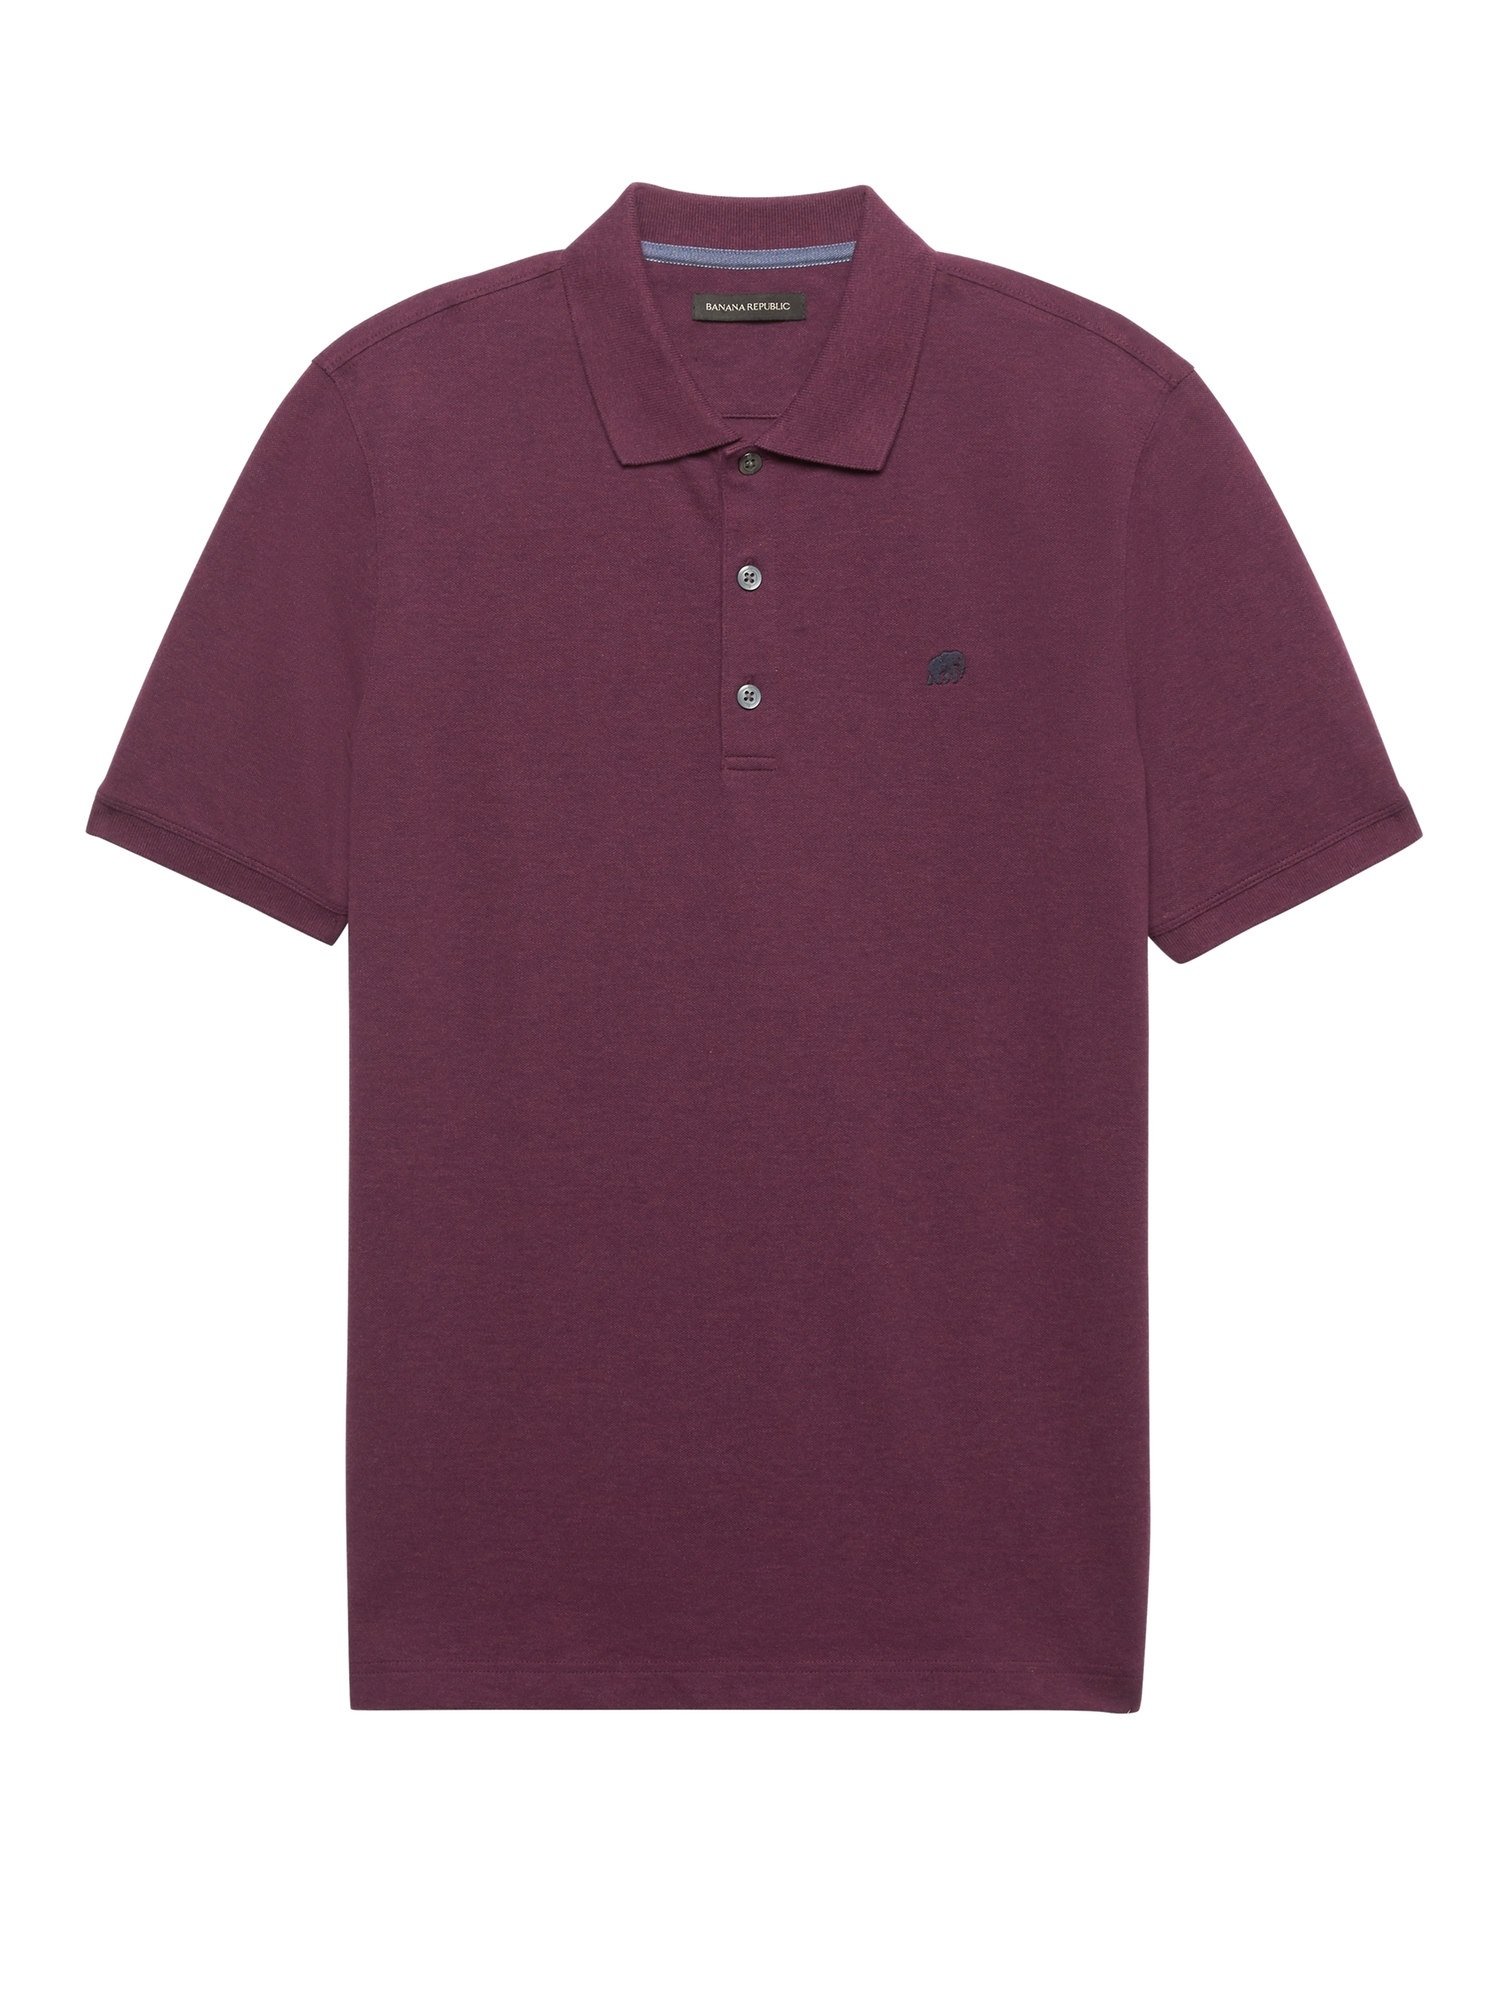 Solid Pique Polo T-Shirt product image